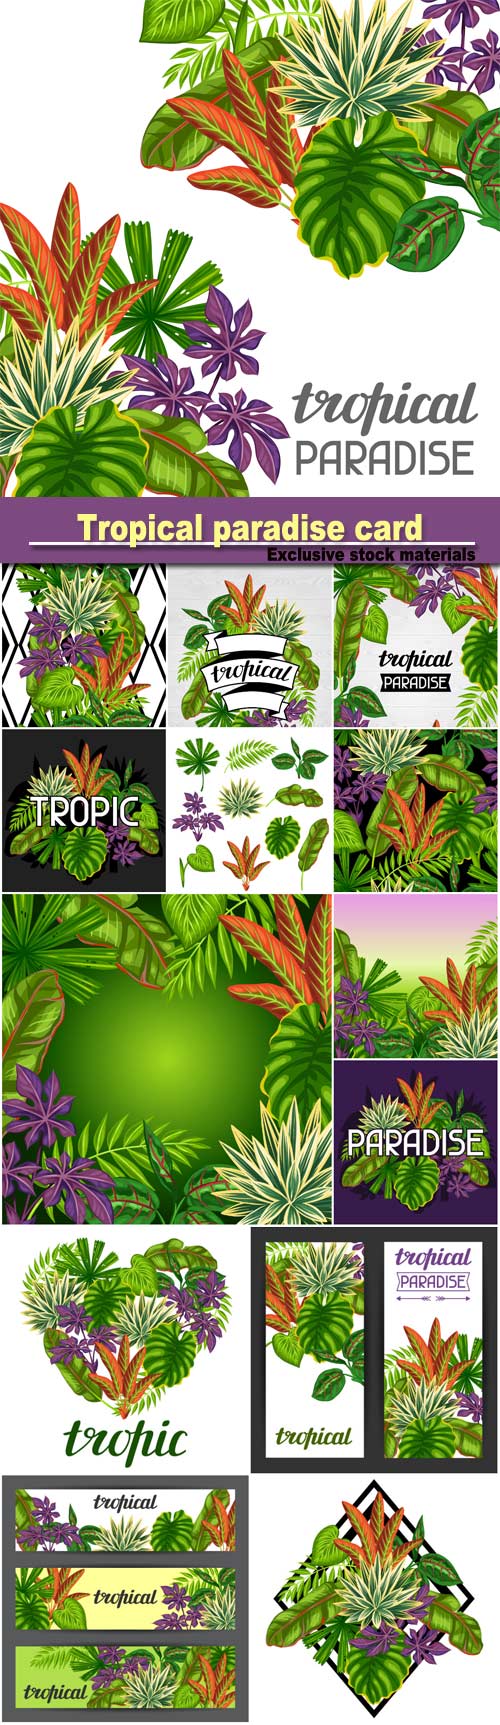 Tropical paradise card with stylized leaves and flowers